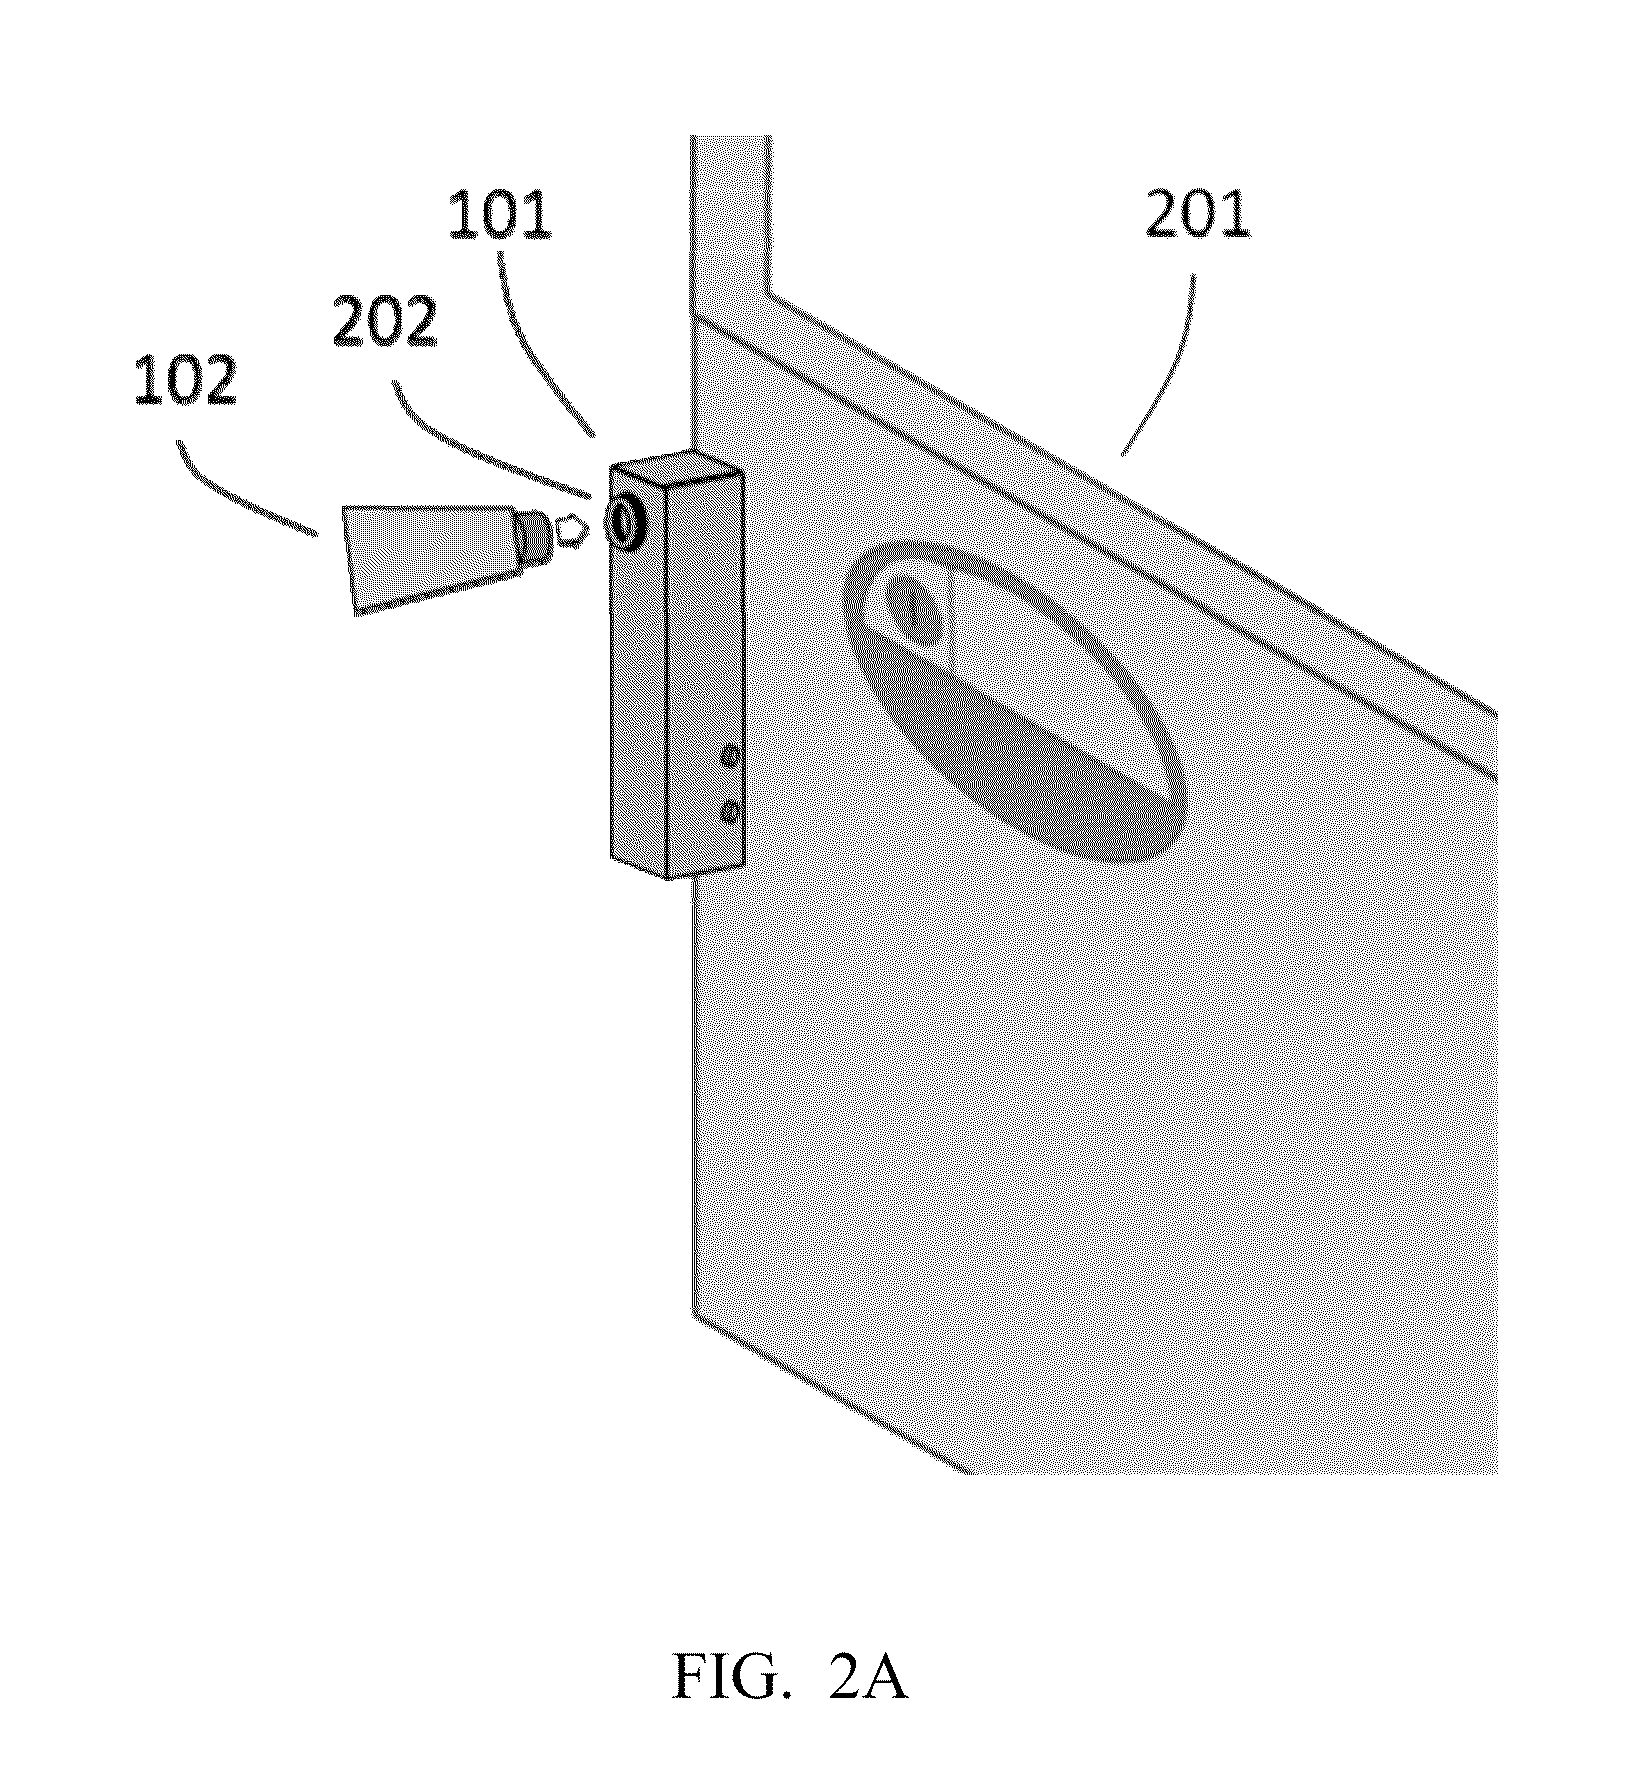 Externally-mounted apparatus and associated systems for controlling vehicle access